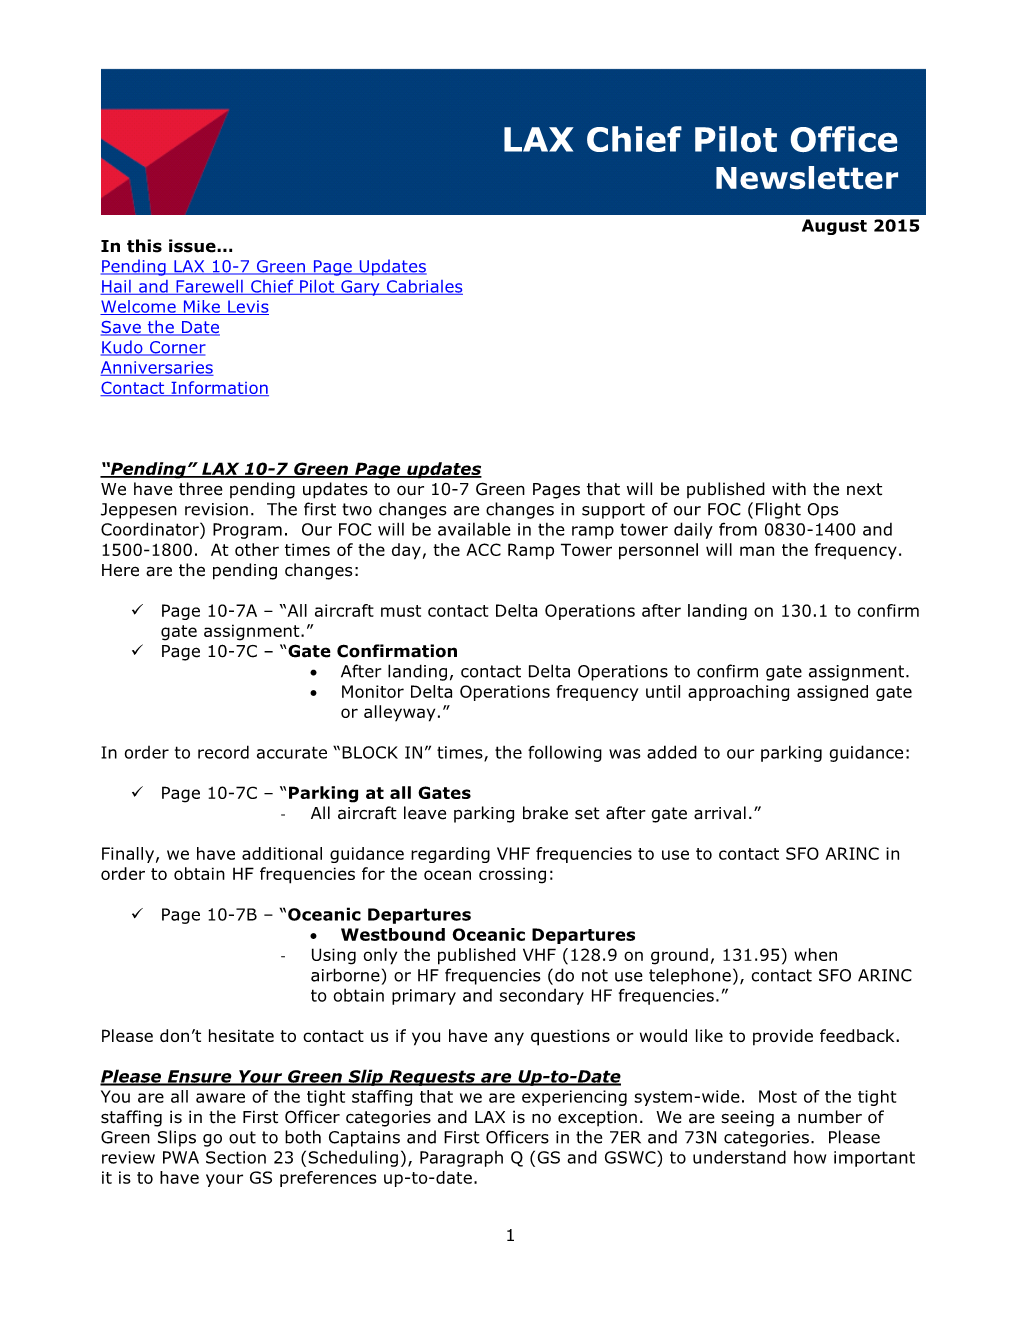 LAX Chief Pilot Office Newsletter